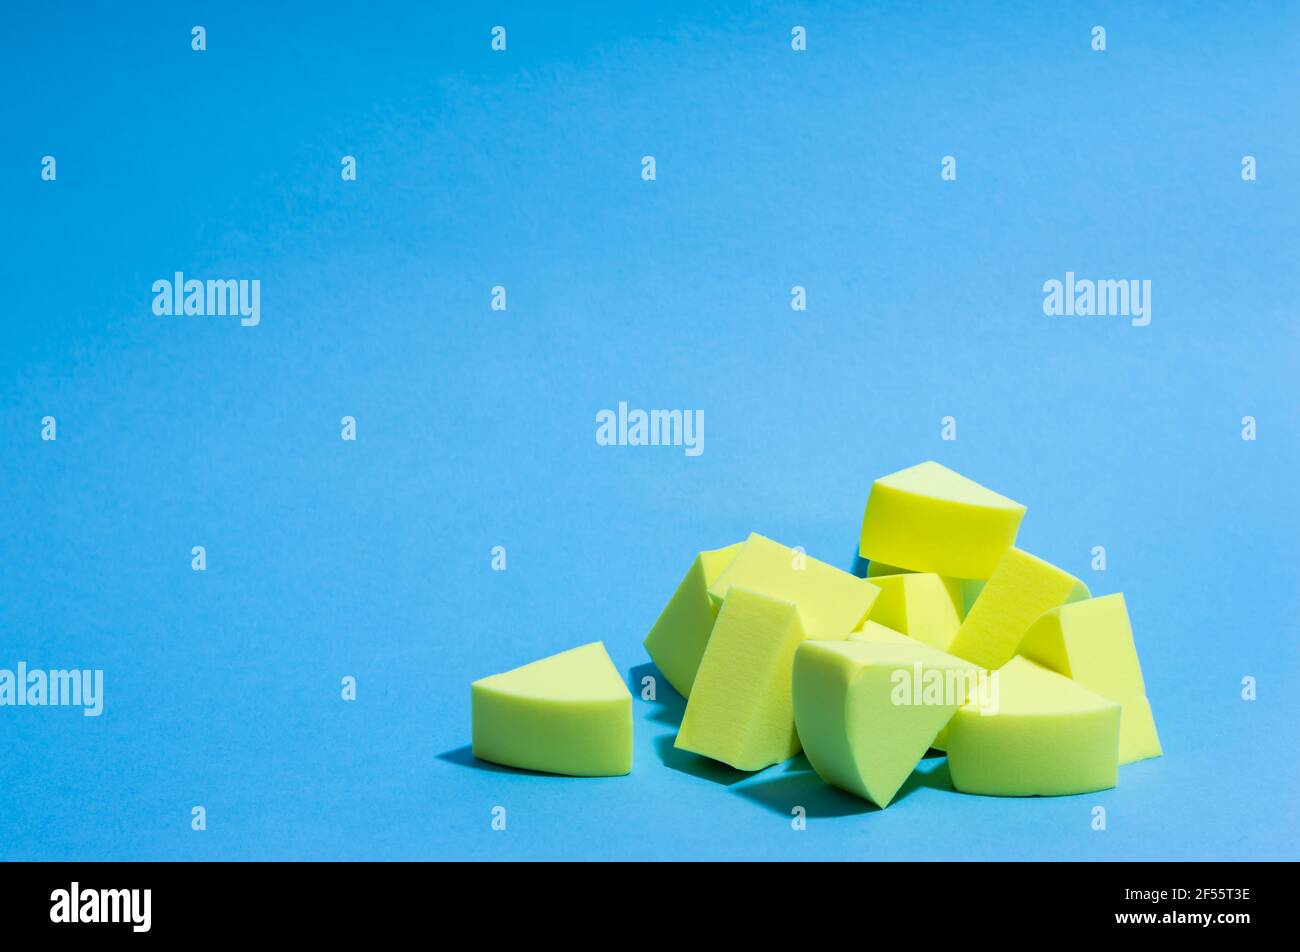 Make-up yellow sponges on a blue background Stock Photo